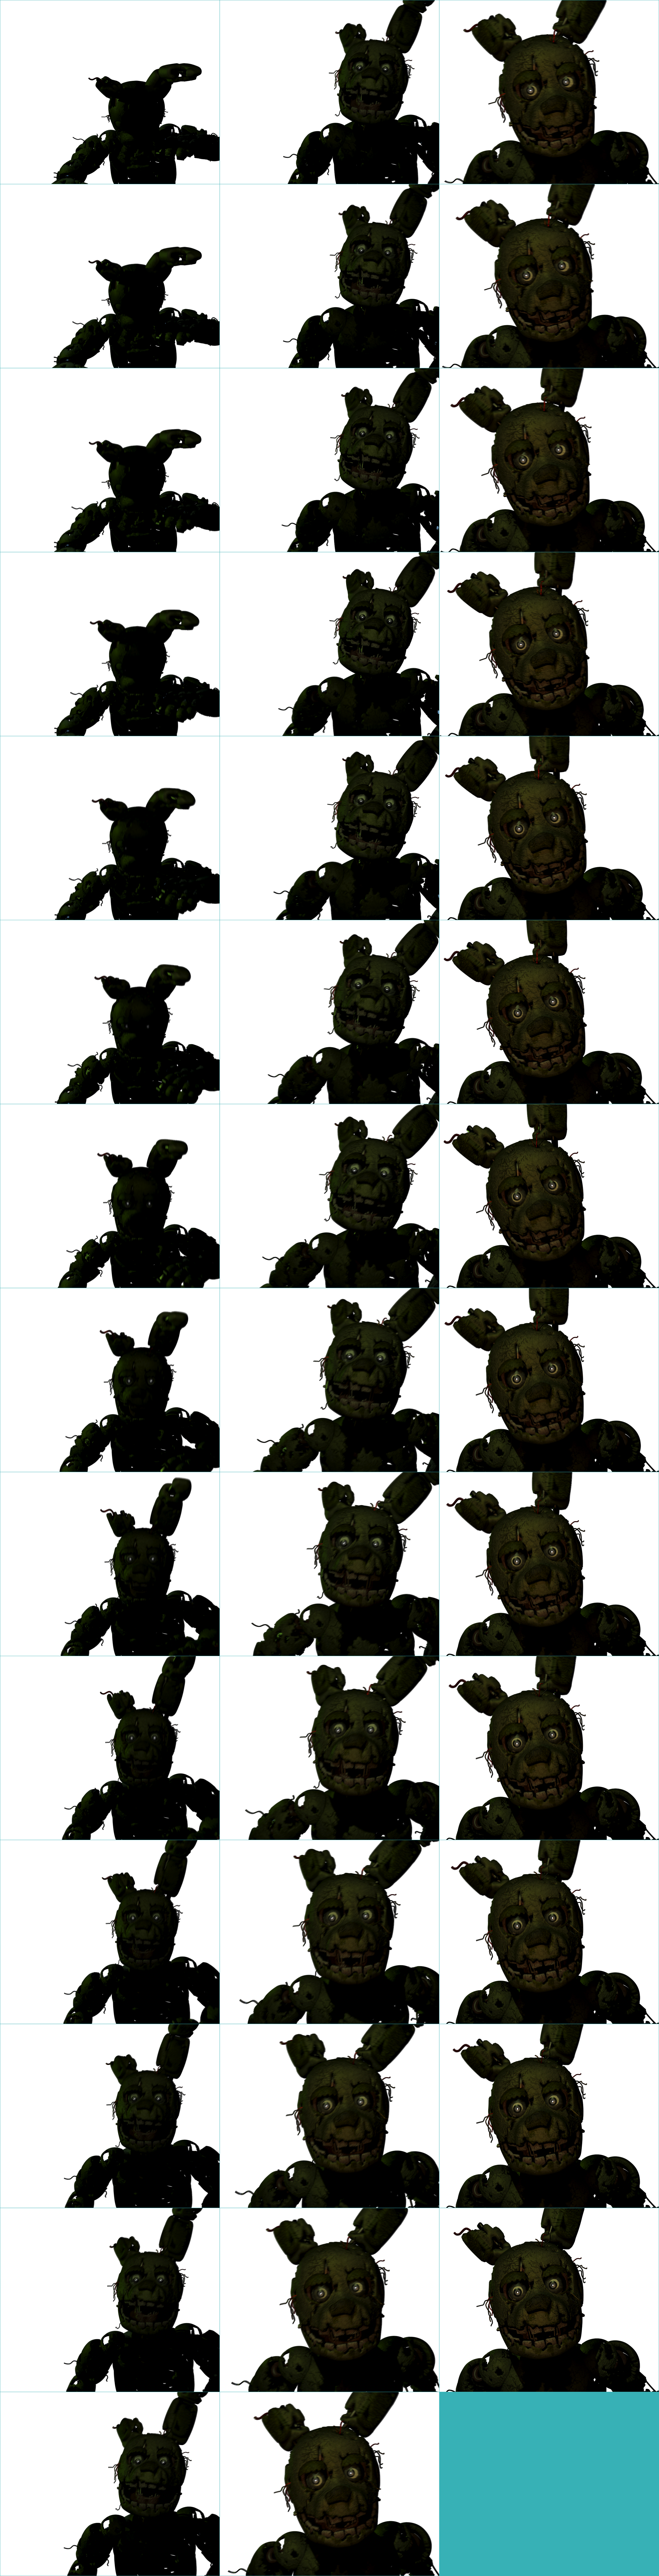 Five Nights at Freddy's 3 - Springtrap Jumpscare 1